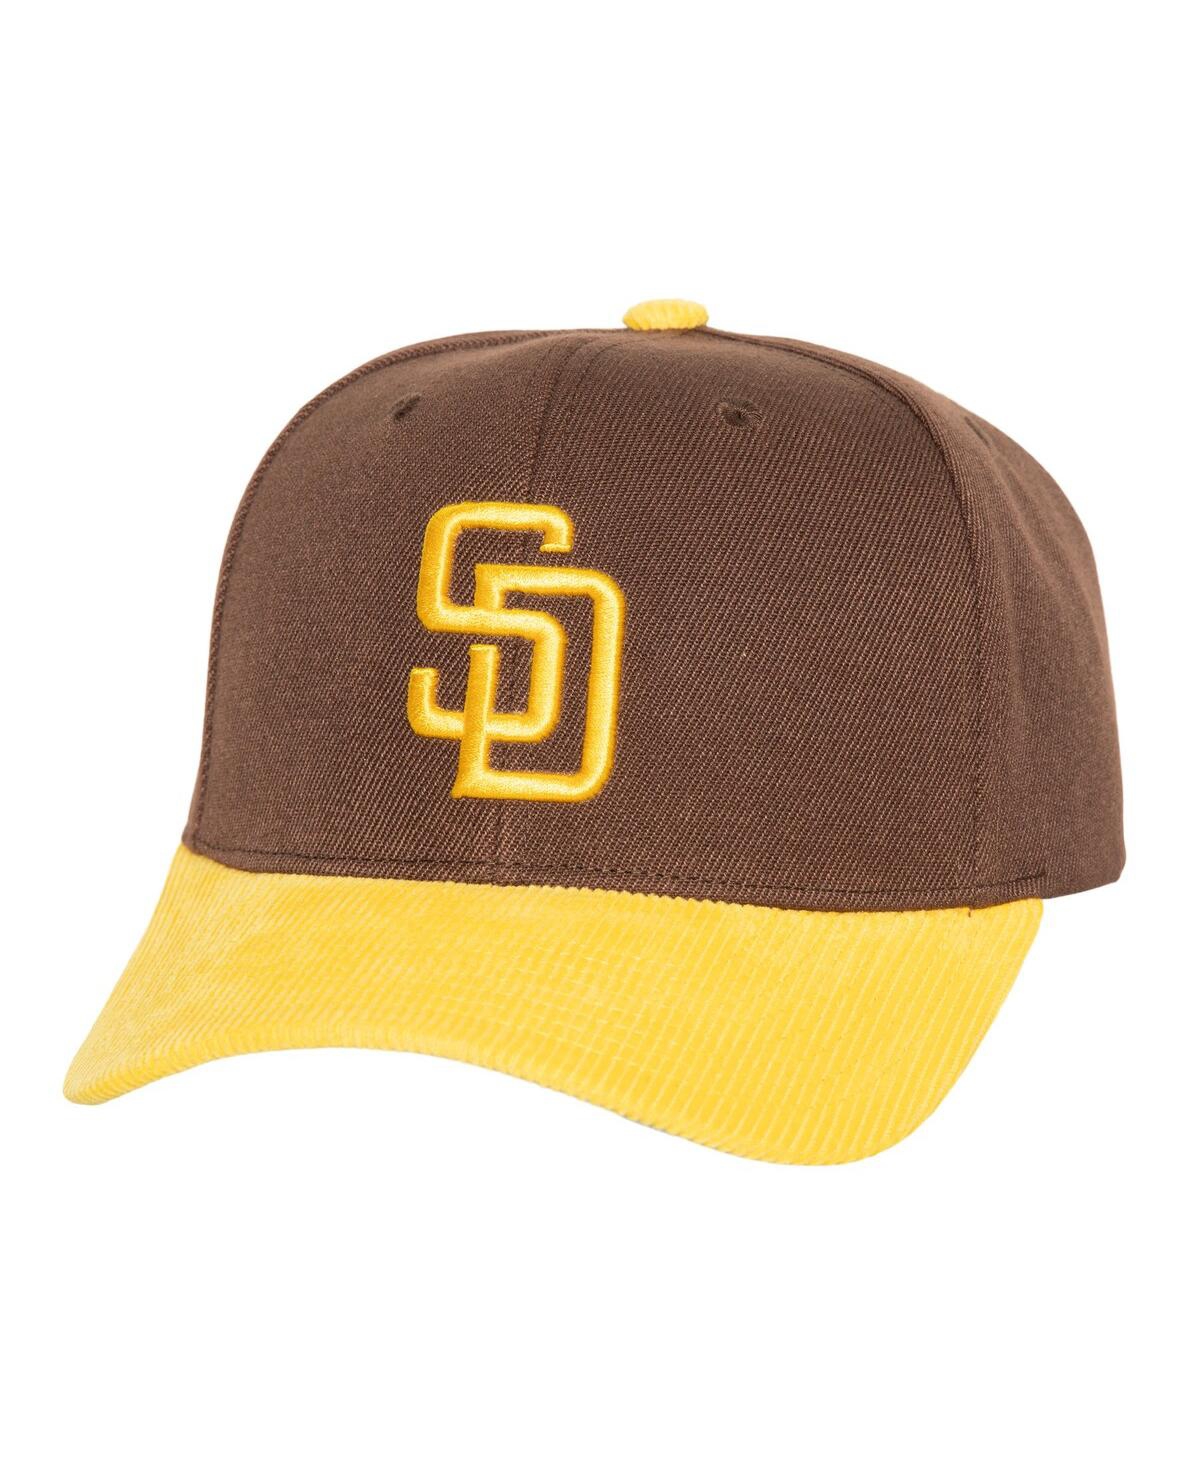 Men's Mitchell & Ness Brown San Diego Padres Corduroy Pro Snapback Hat - Brown